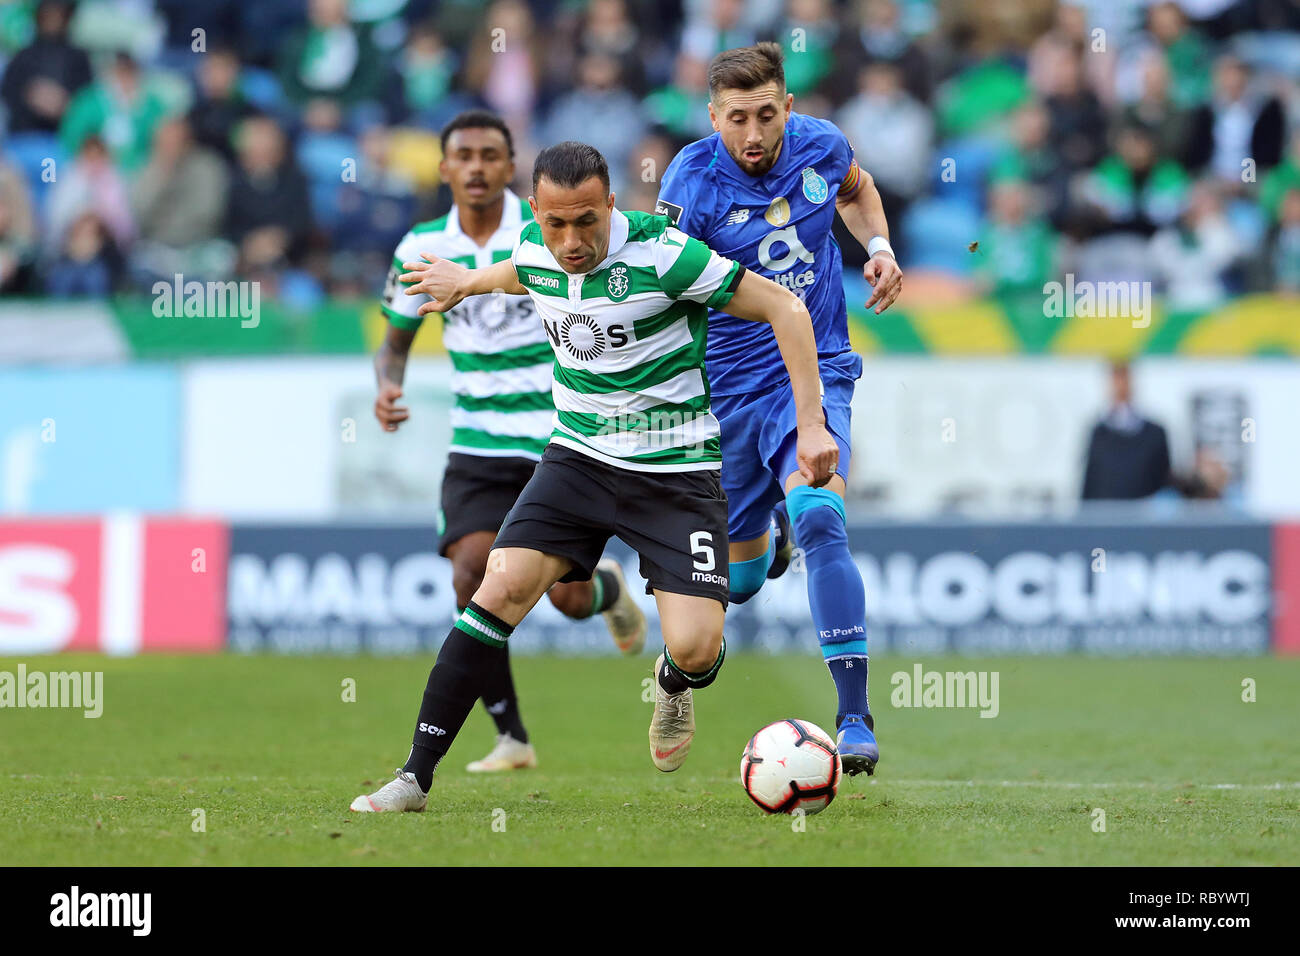 Jefferson of Sporting (L) and Héctor Herrera of FC Porto (R) are seen during the League NOS 2018/19 football match between Sporting CP vs FC Porto. (Final score: Sporting CP 0 - 0 FC Porto) Stock Photo